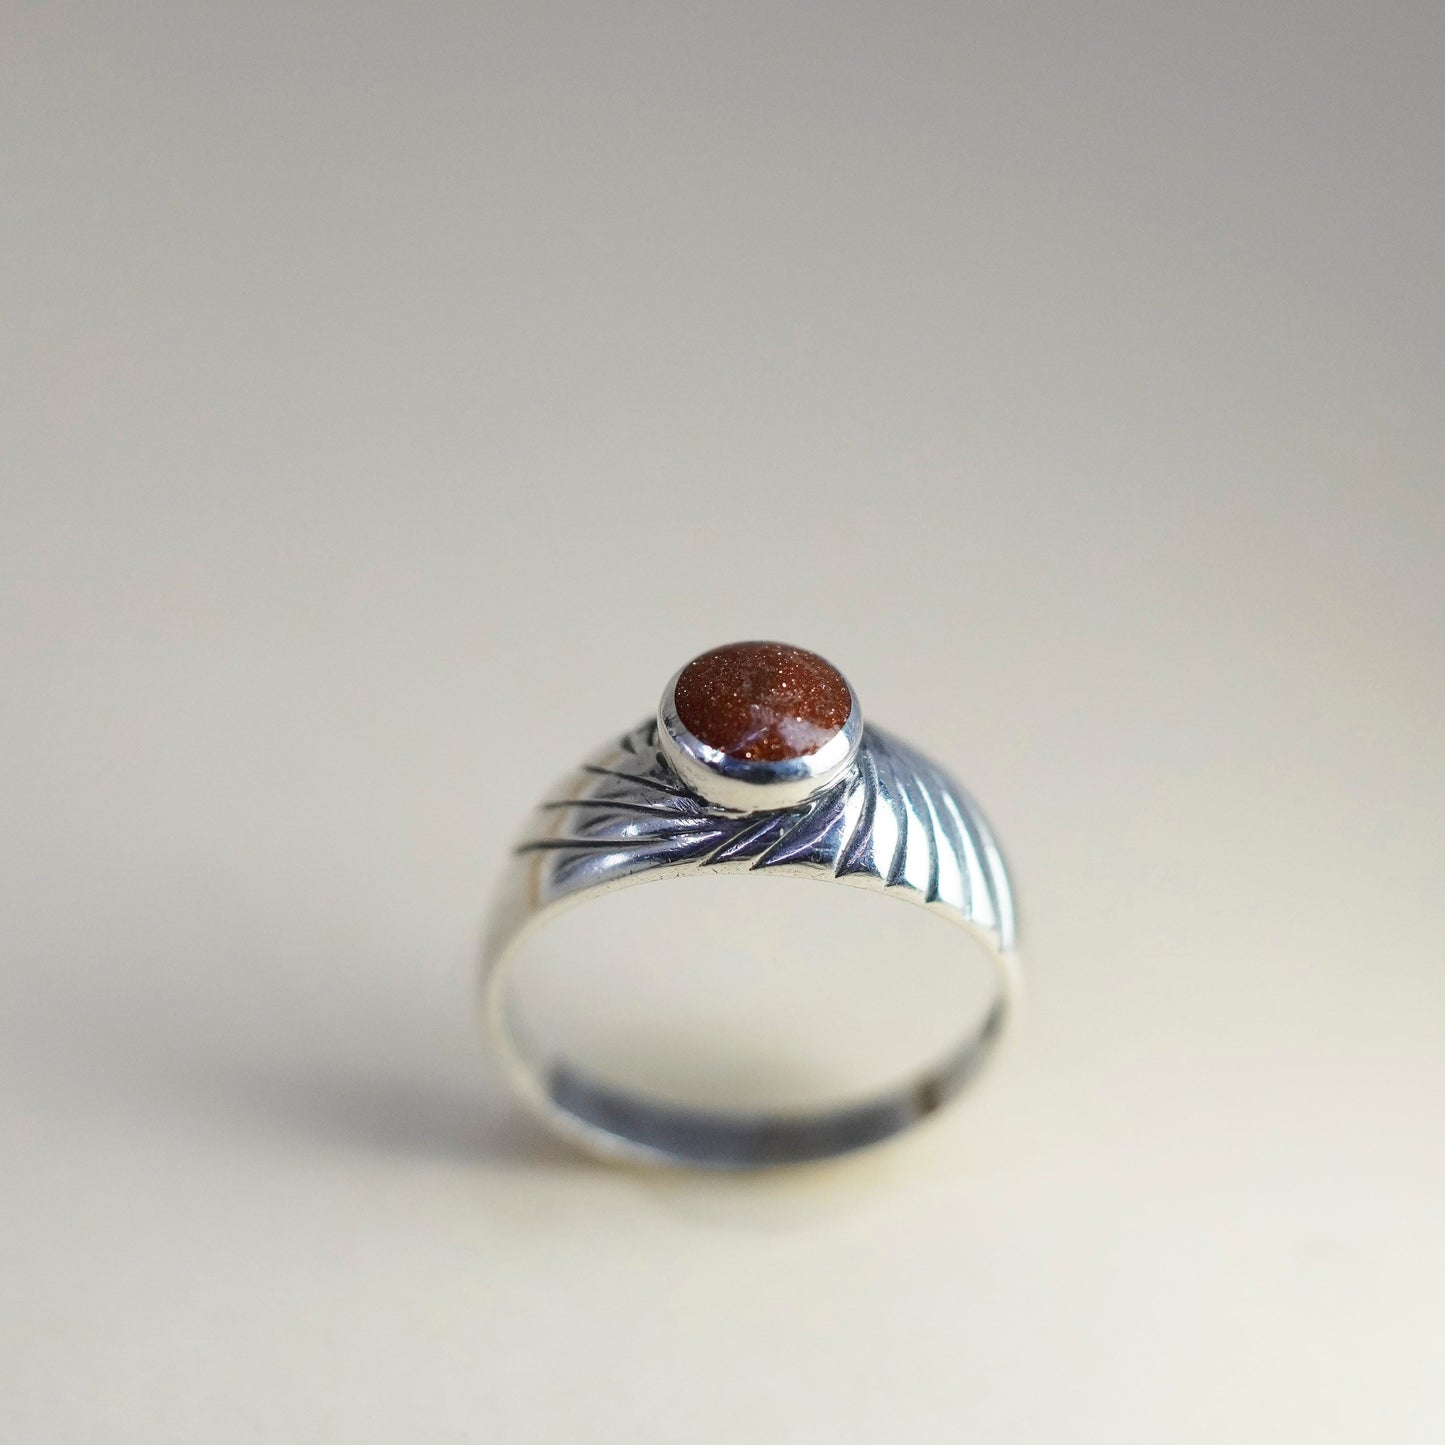 Size 6.25, Vintage handmade sterling 925 silver statement ring with goldstone